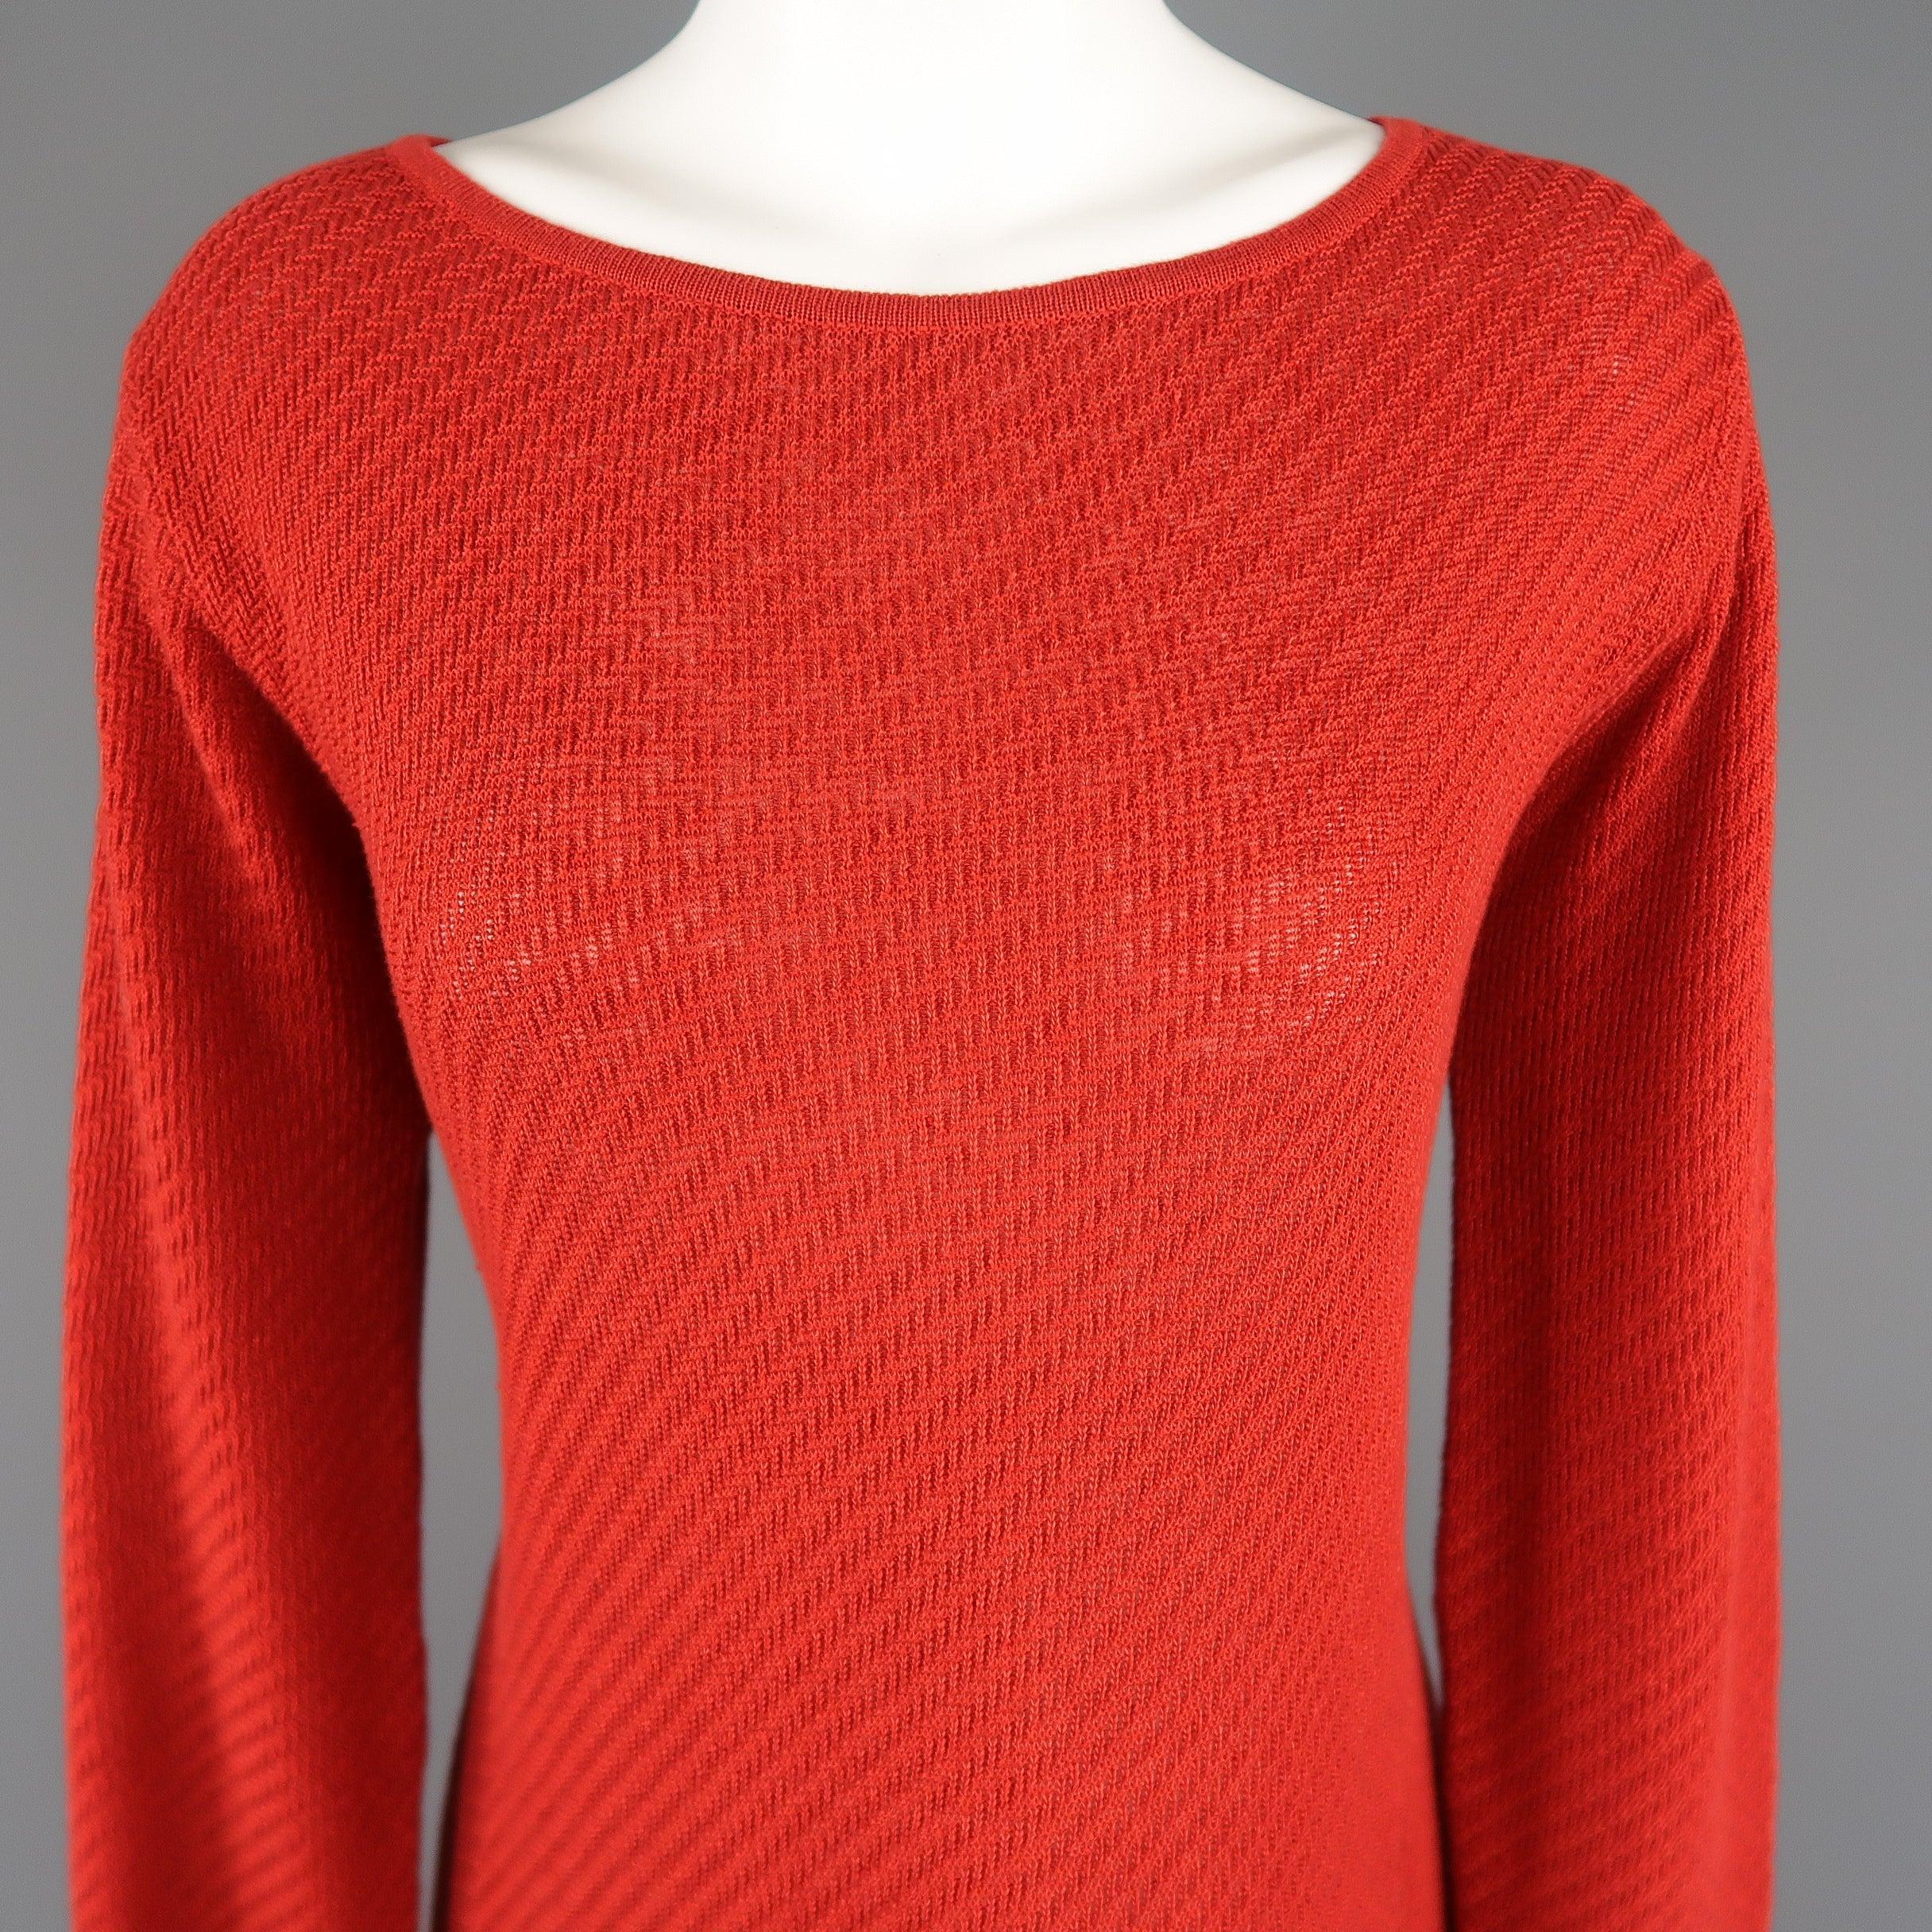 RALPH LAUREN COLLECTION pullover sweater tunic comes in red linen knit with a boat neck, long sleeves, and double slit hem. 
Excellent Pre-Owned Condition.
 

Marked:   L
 

Measurements: 
  
l	Shoulder: 16 inches 
l	Bust: 40 inches 
l	Sleeve: 21